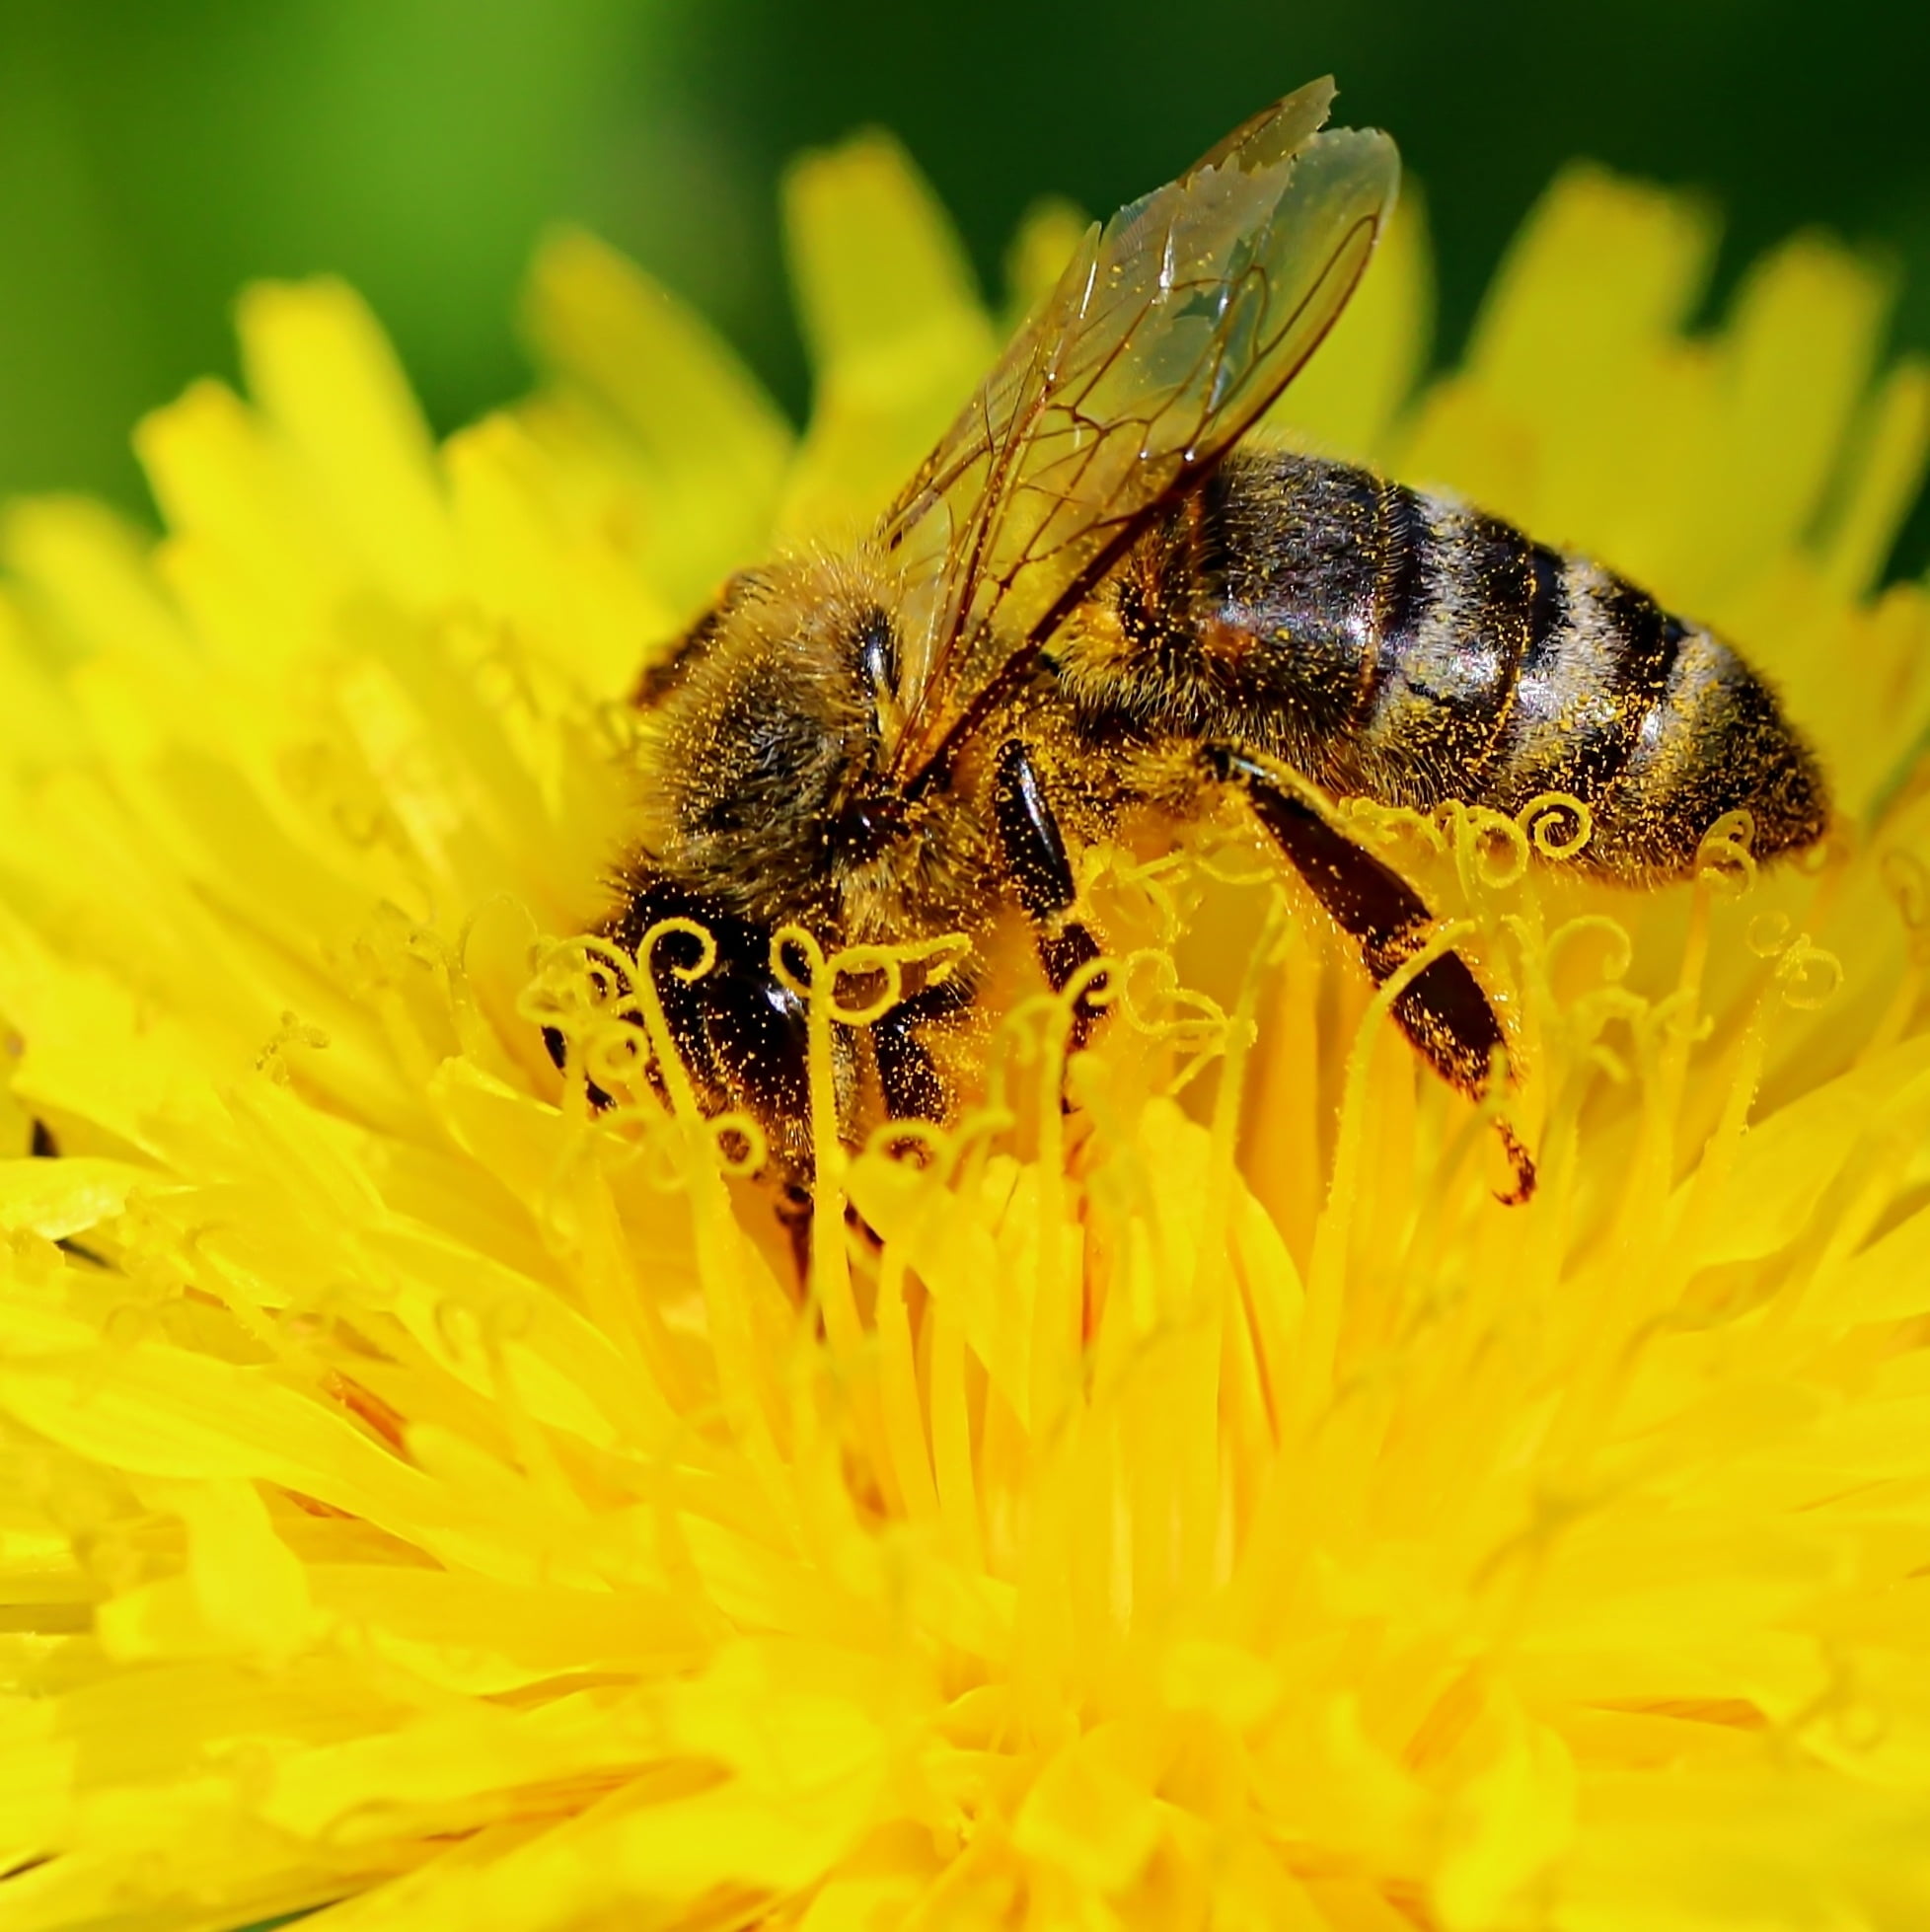 Honey Bee on yellow clustered petaled flower close-up photo HD ...